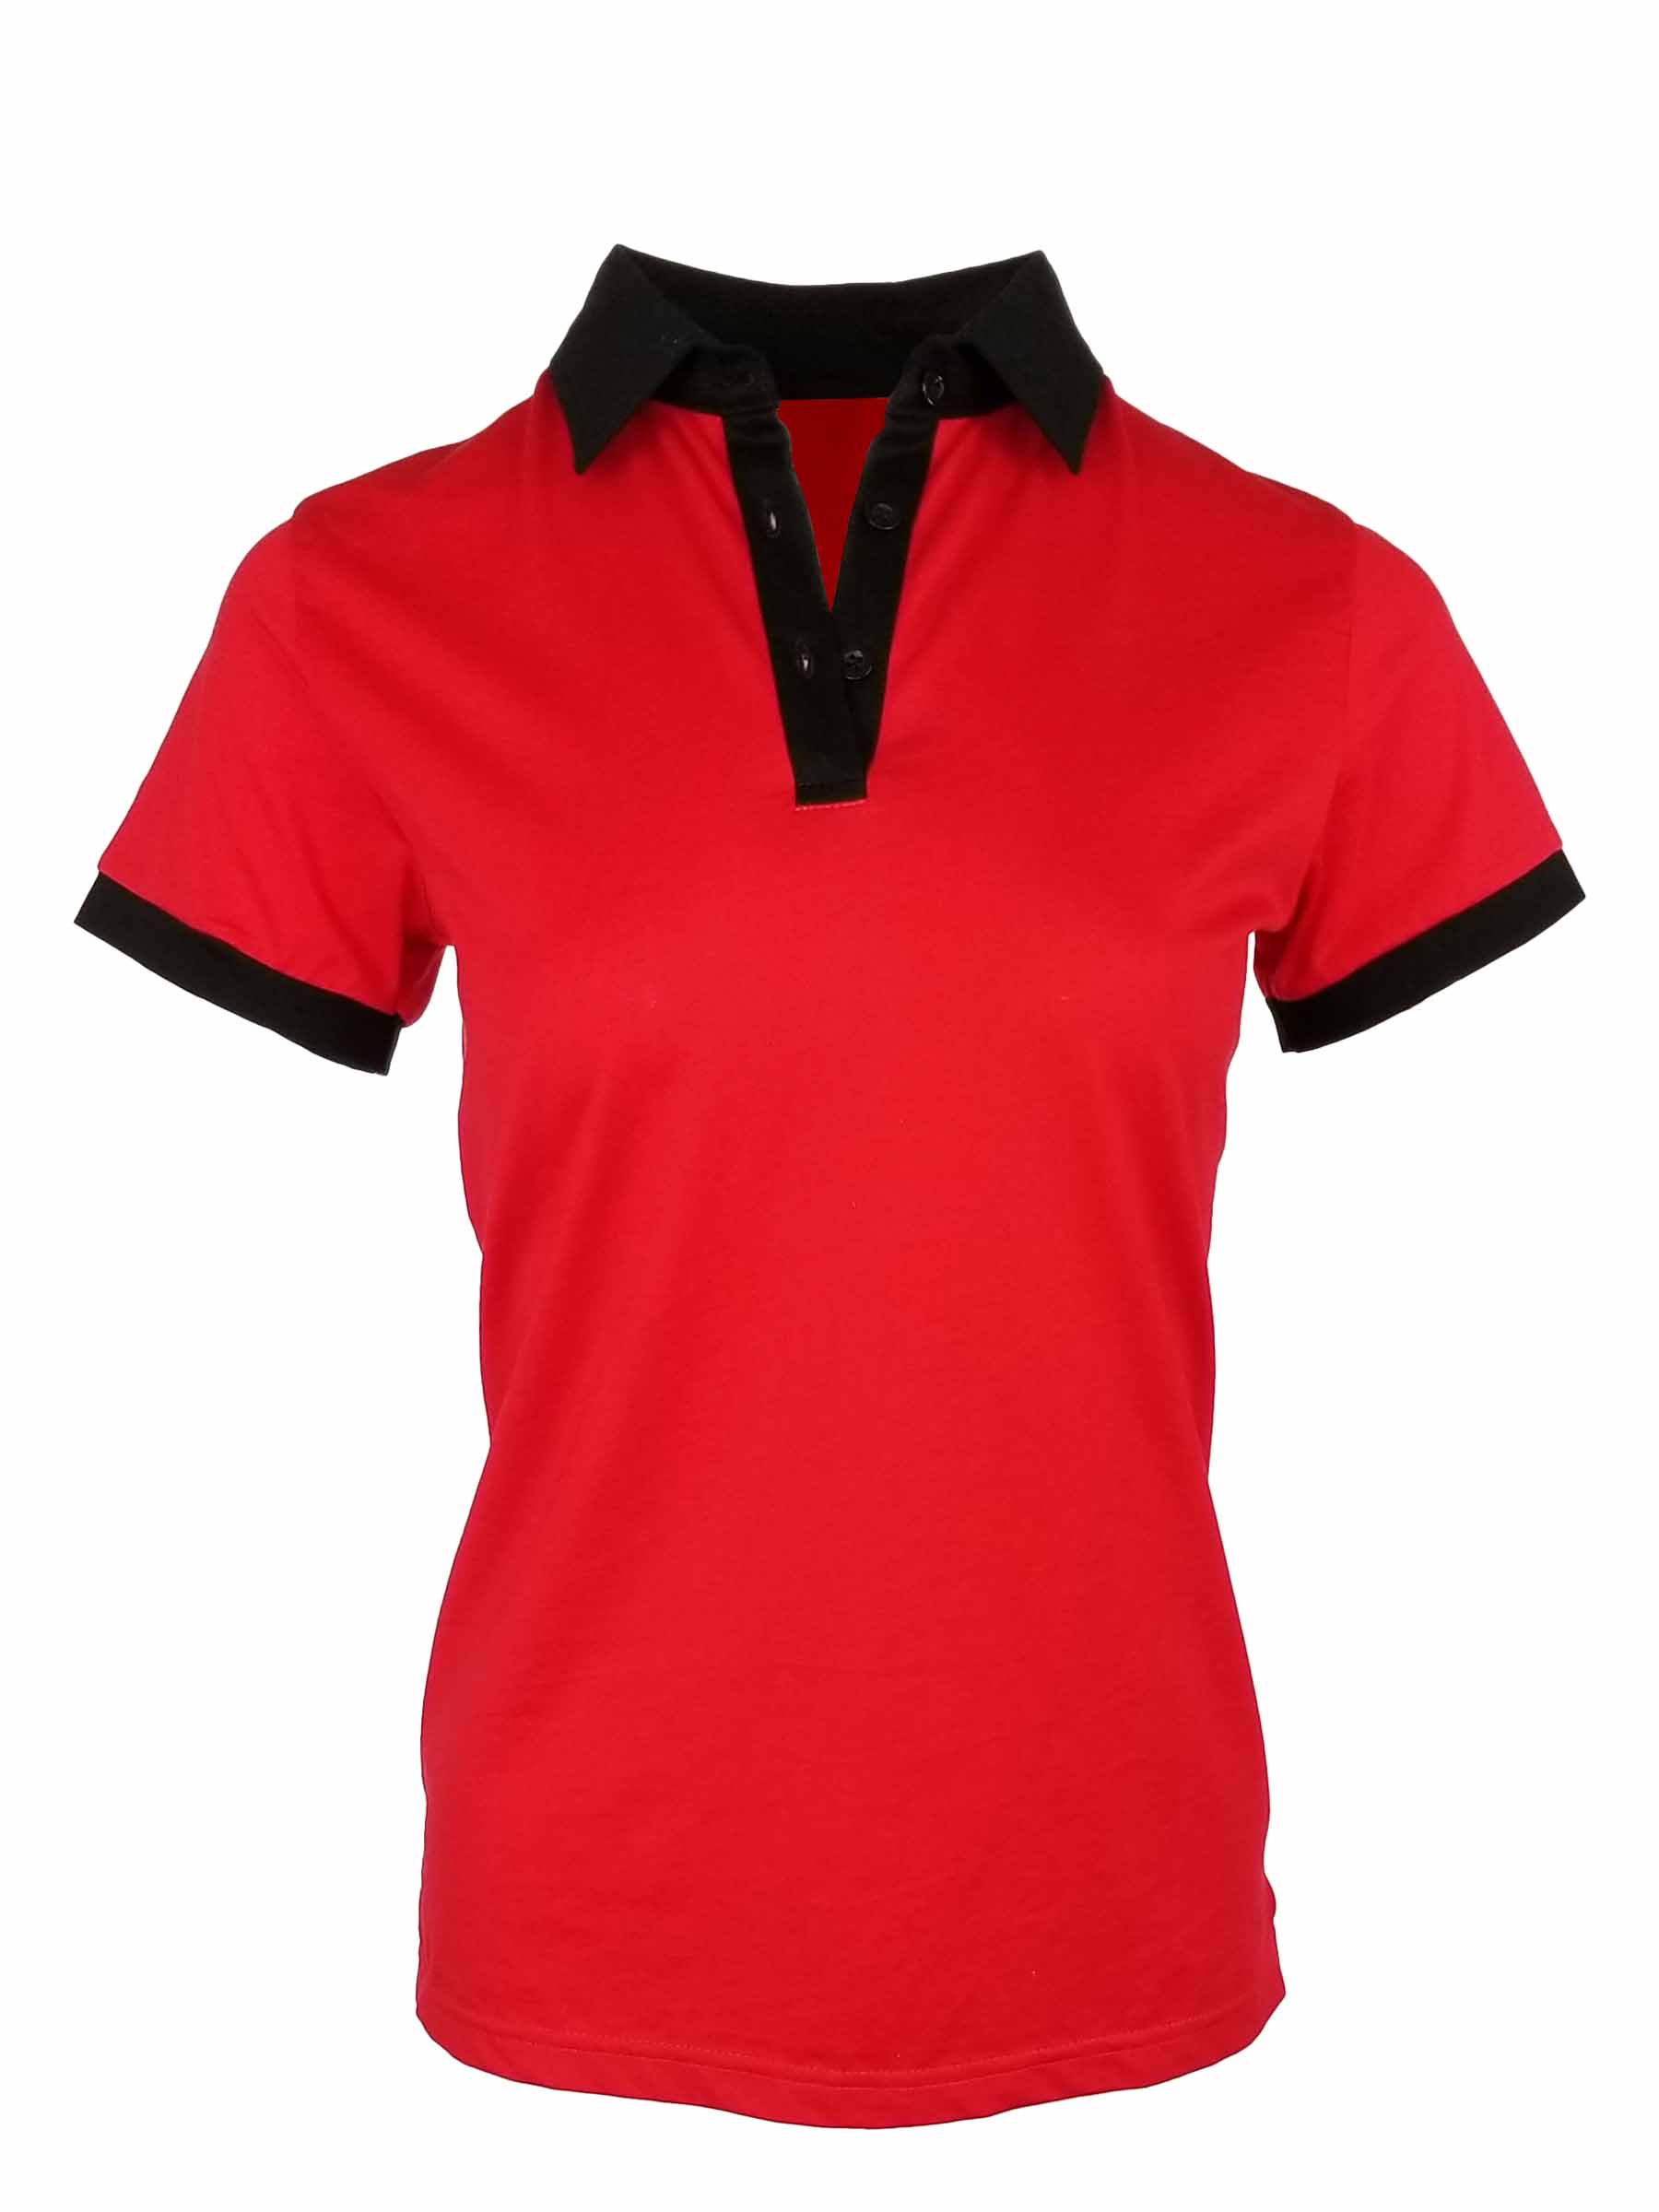 polo red and black